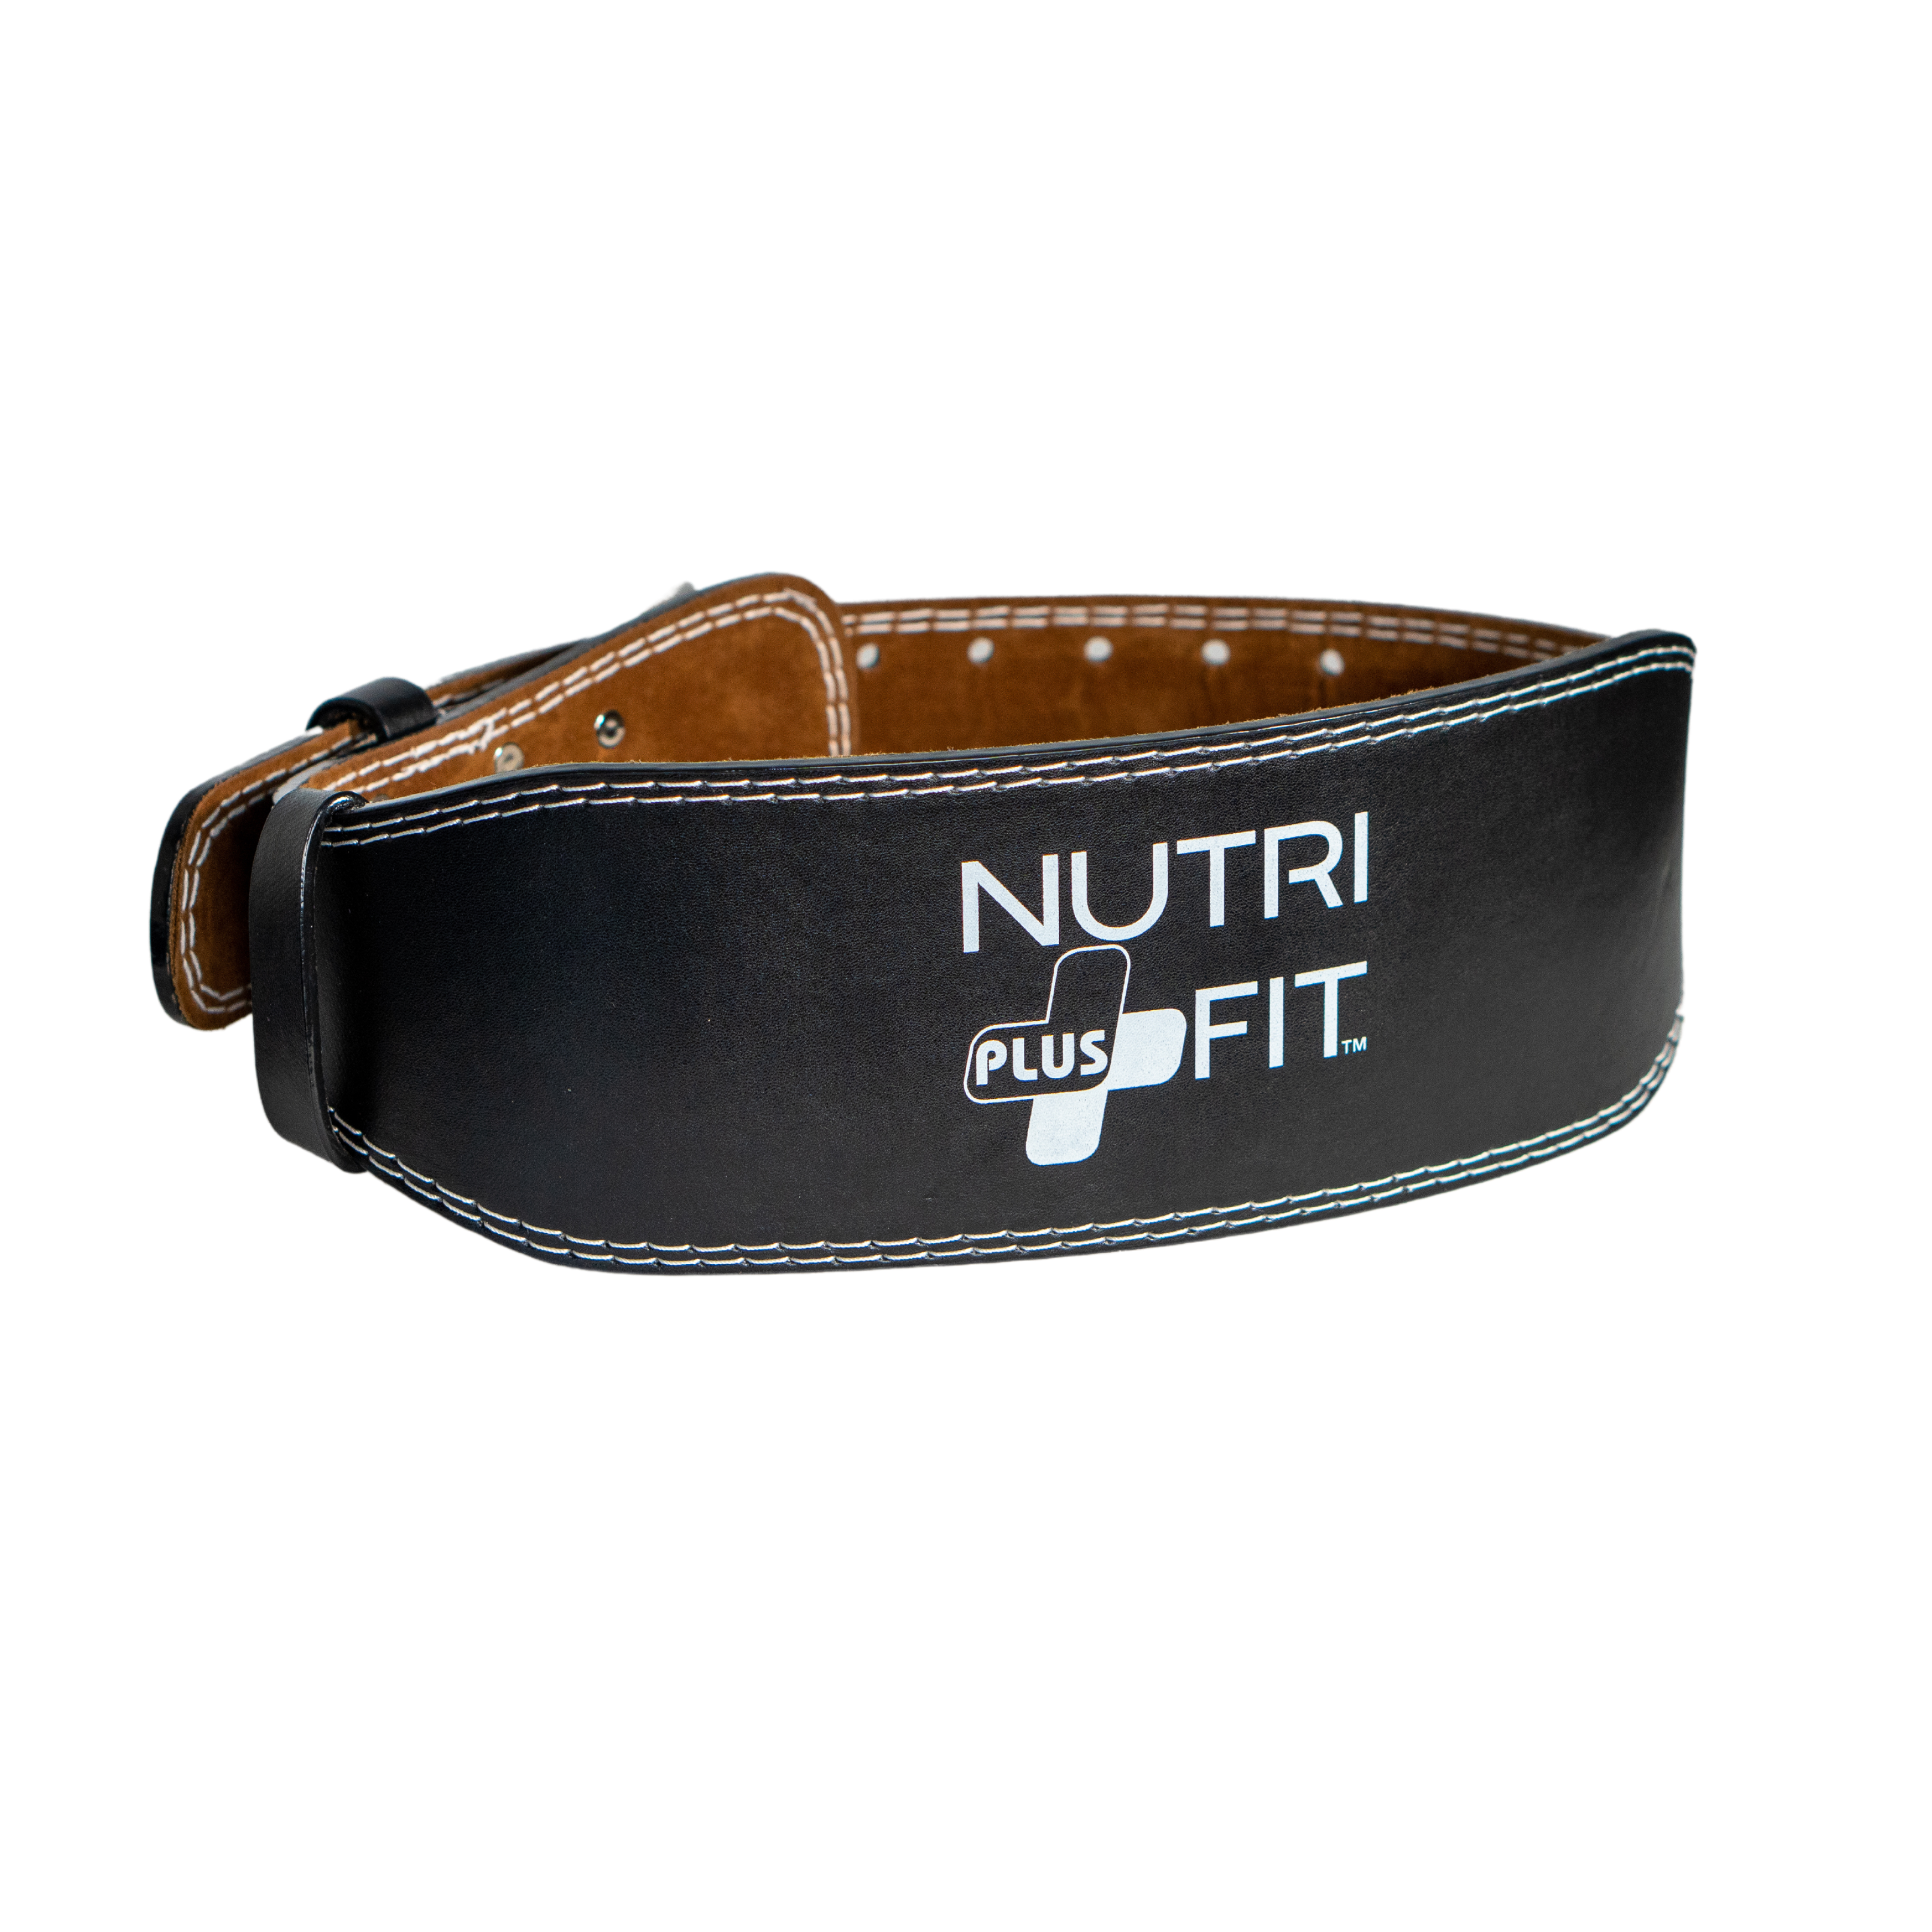 Nutri Fit Plus Premium Leather Weight Lifting Belt for Fitness, Weight Lifting - Support for Men and Women - Deadlift Professional Training Belt